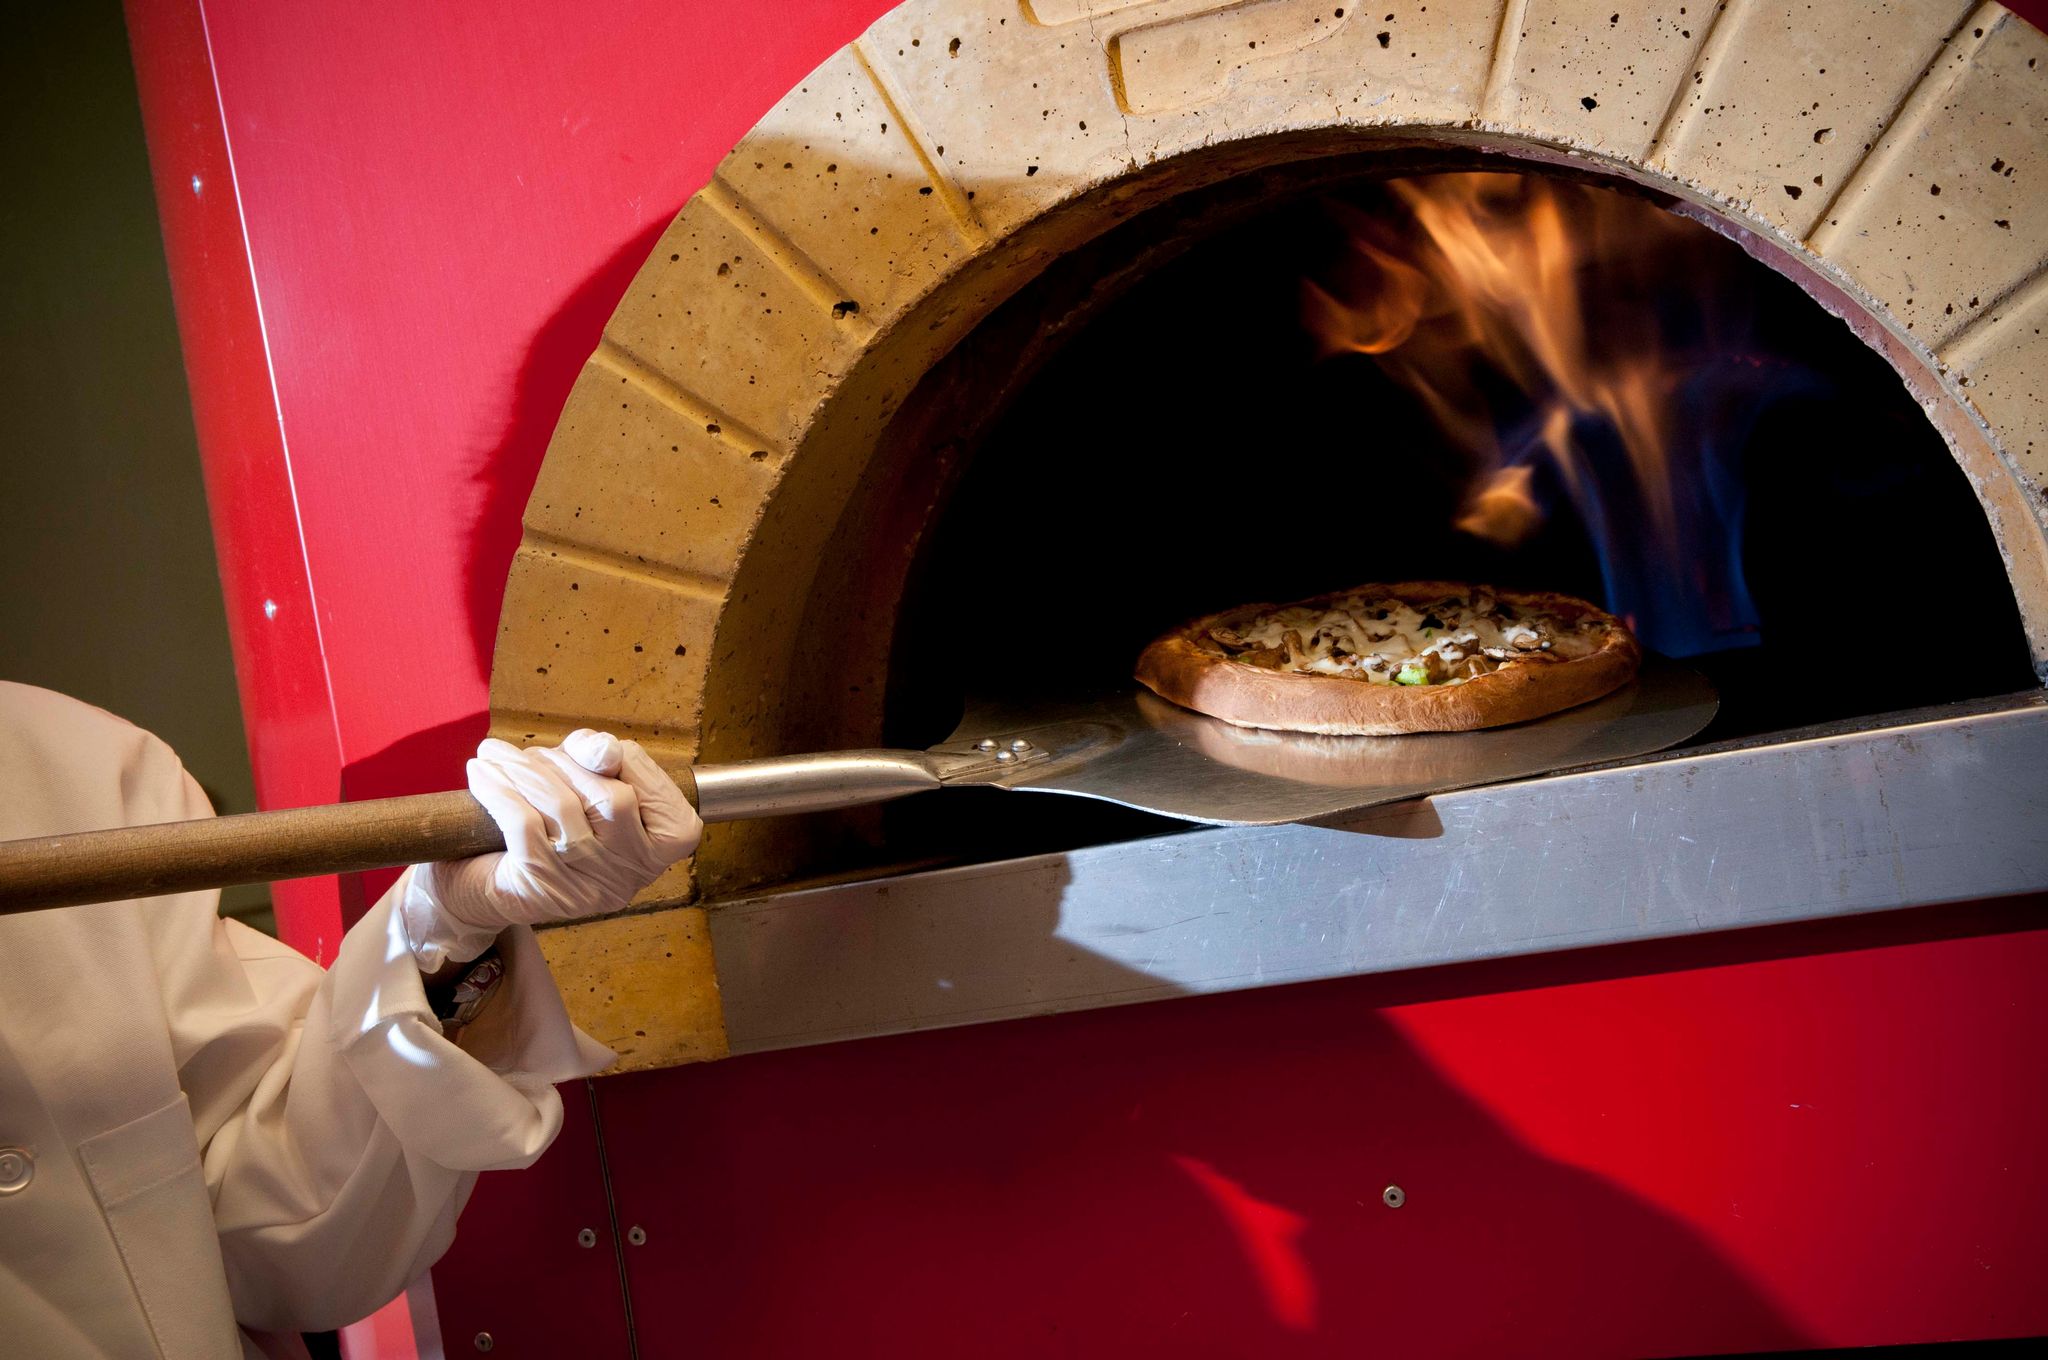 ASC Employee taking pizza oven from the oven